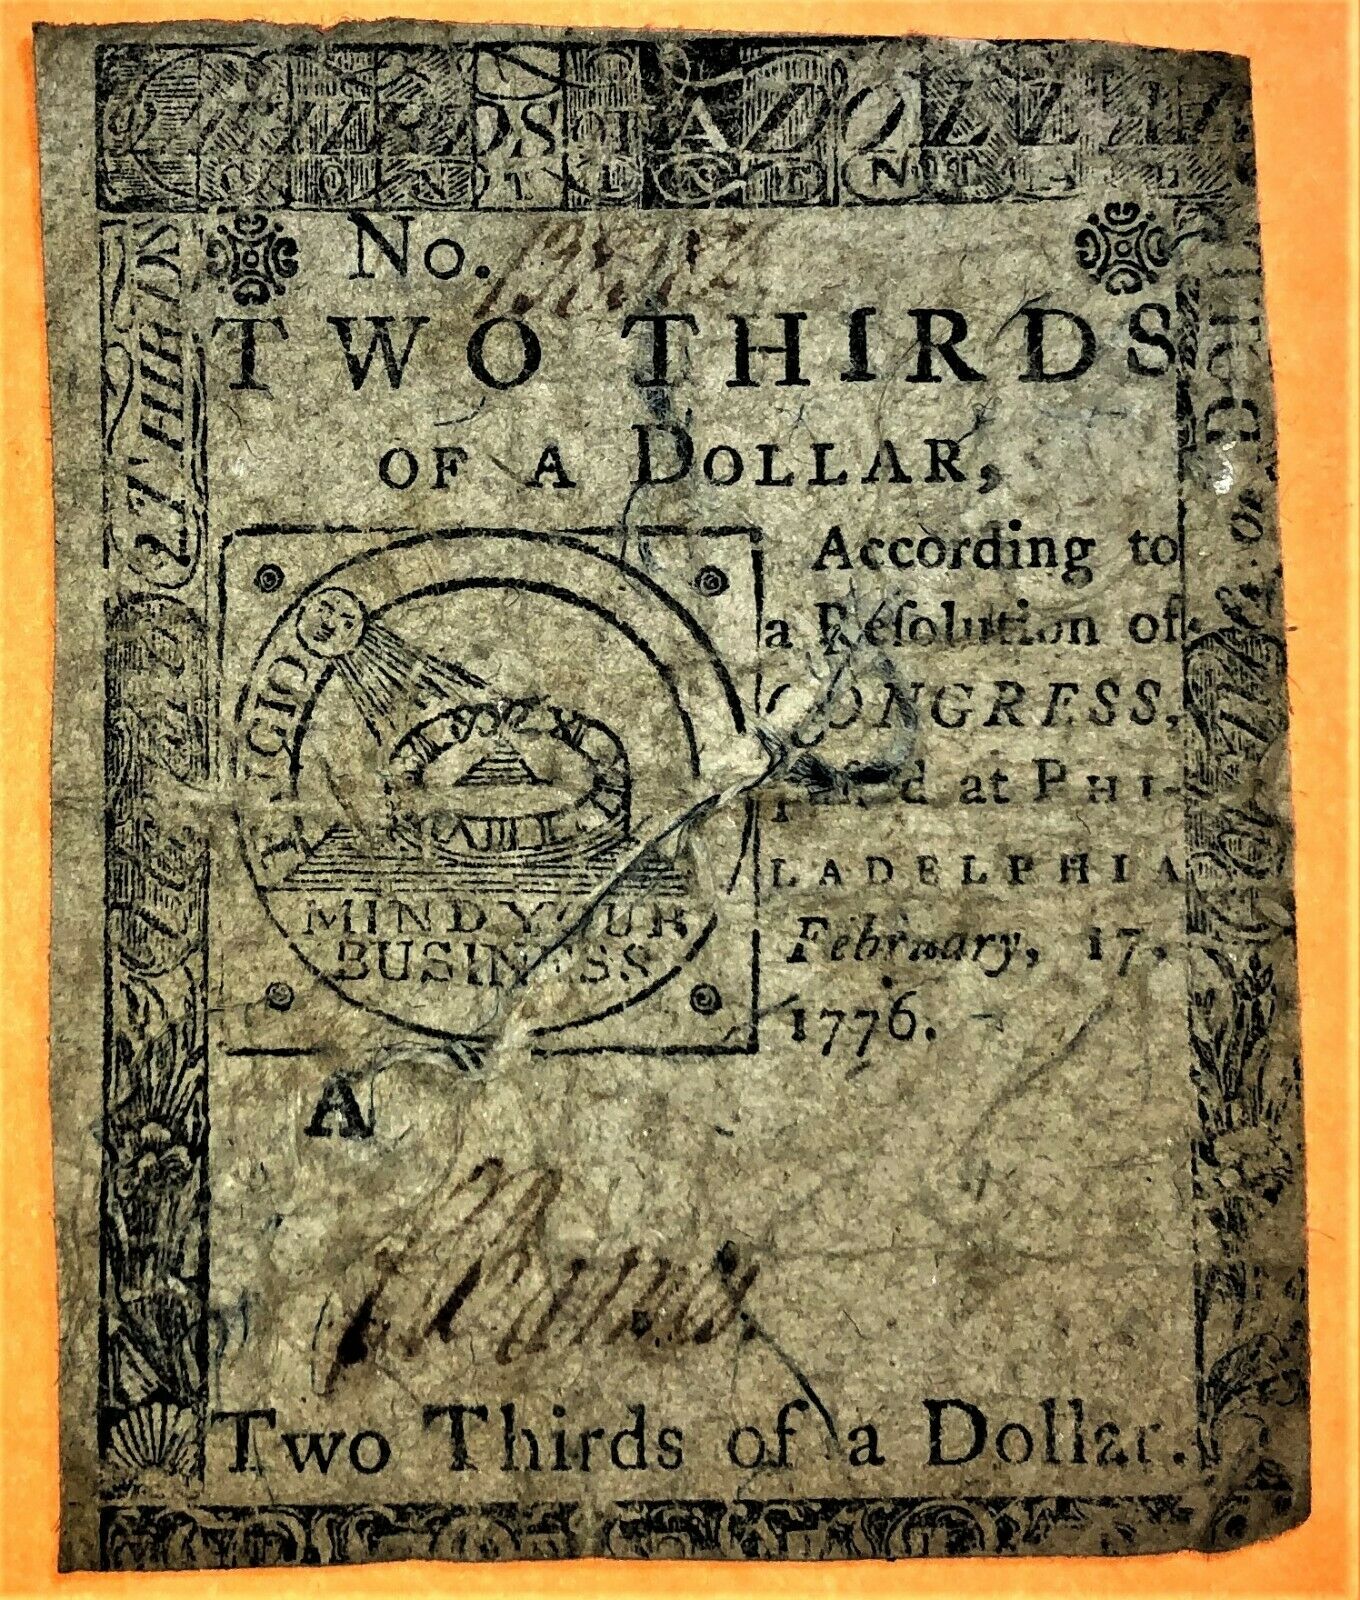 B FRANKLIN DESIGN $2/3 of 1776 PLATE A with LONG BLUE SECURITY THREADS - ERROR?